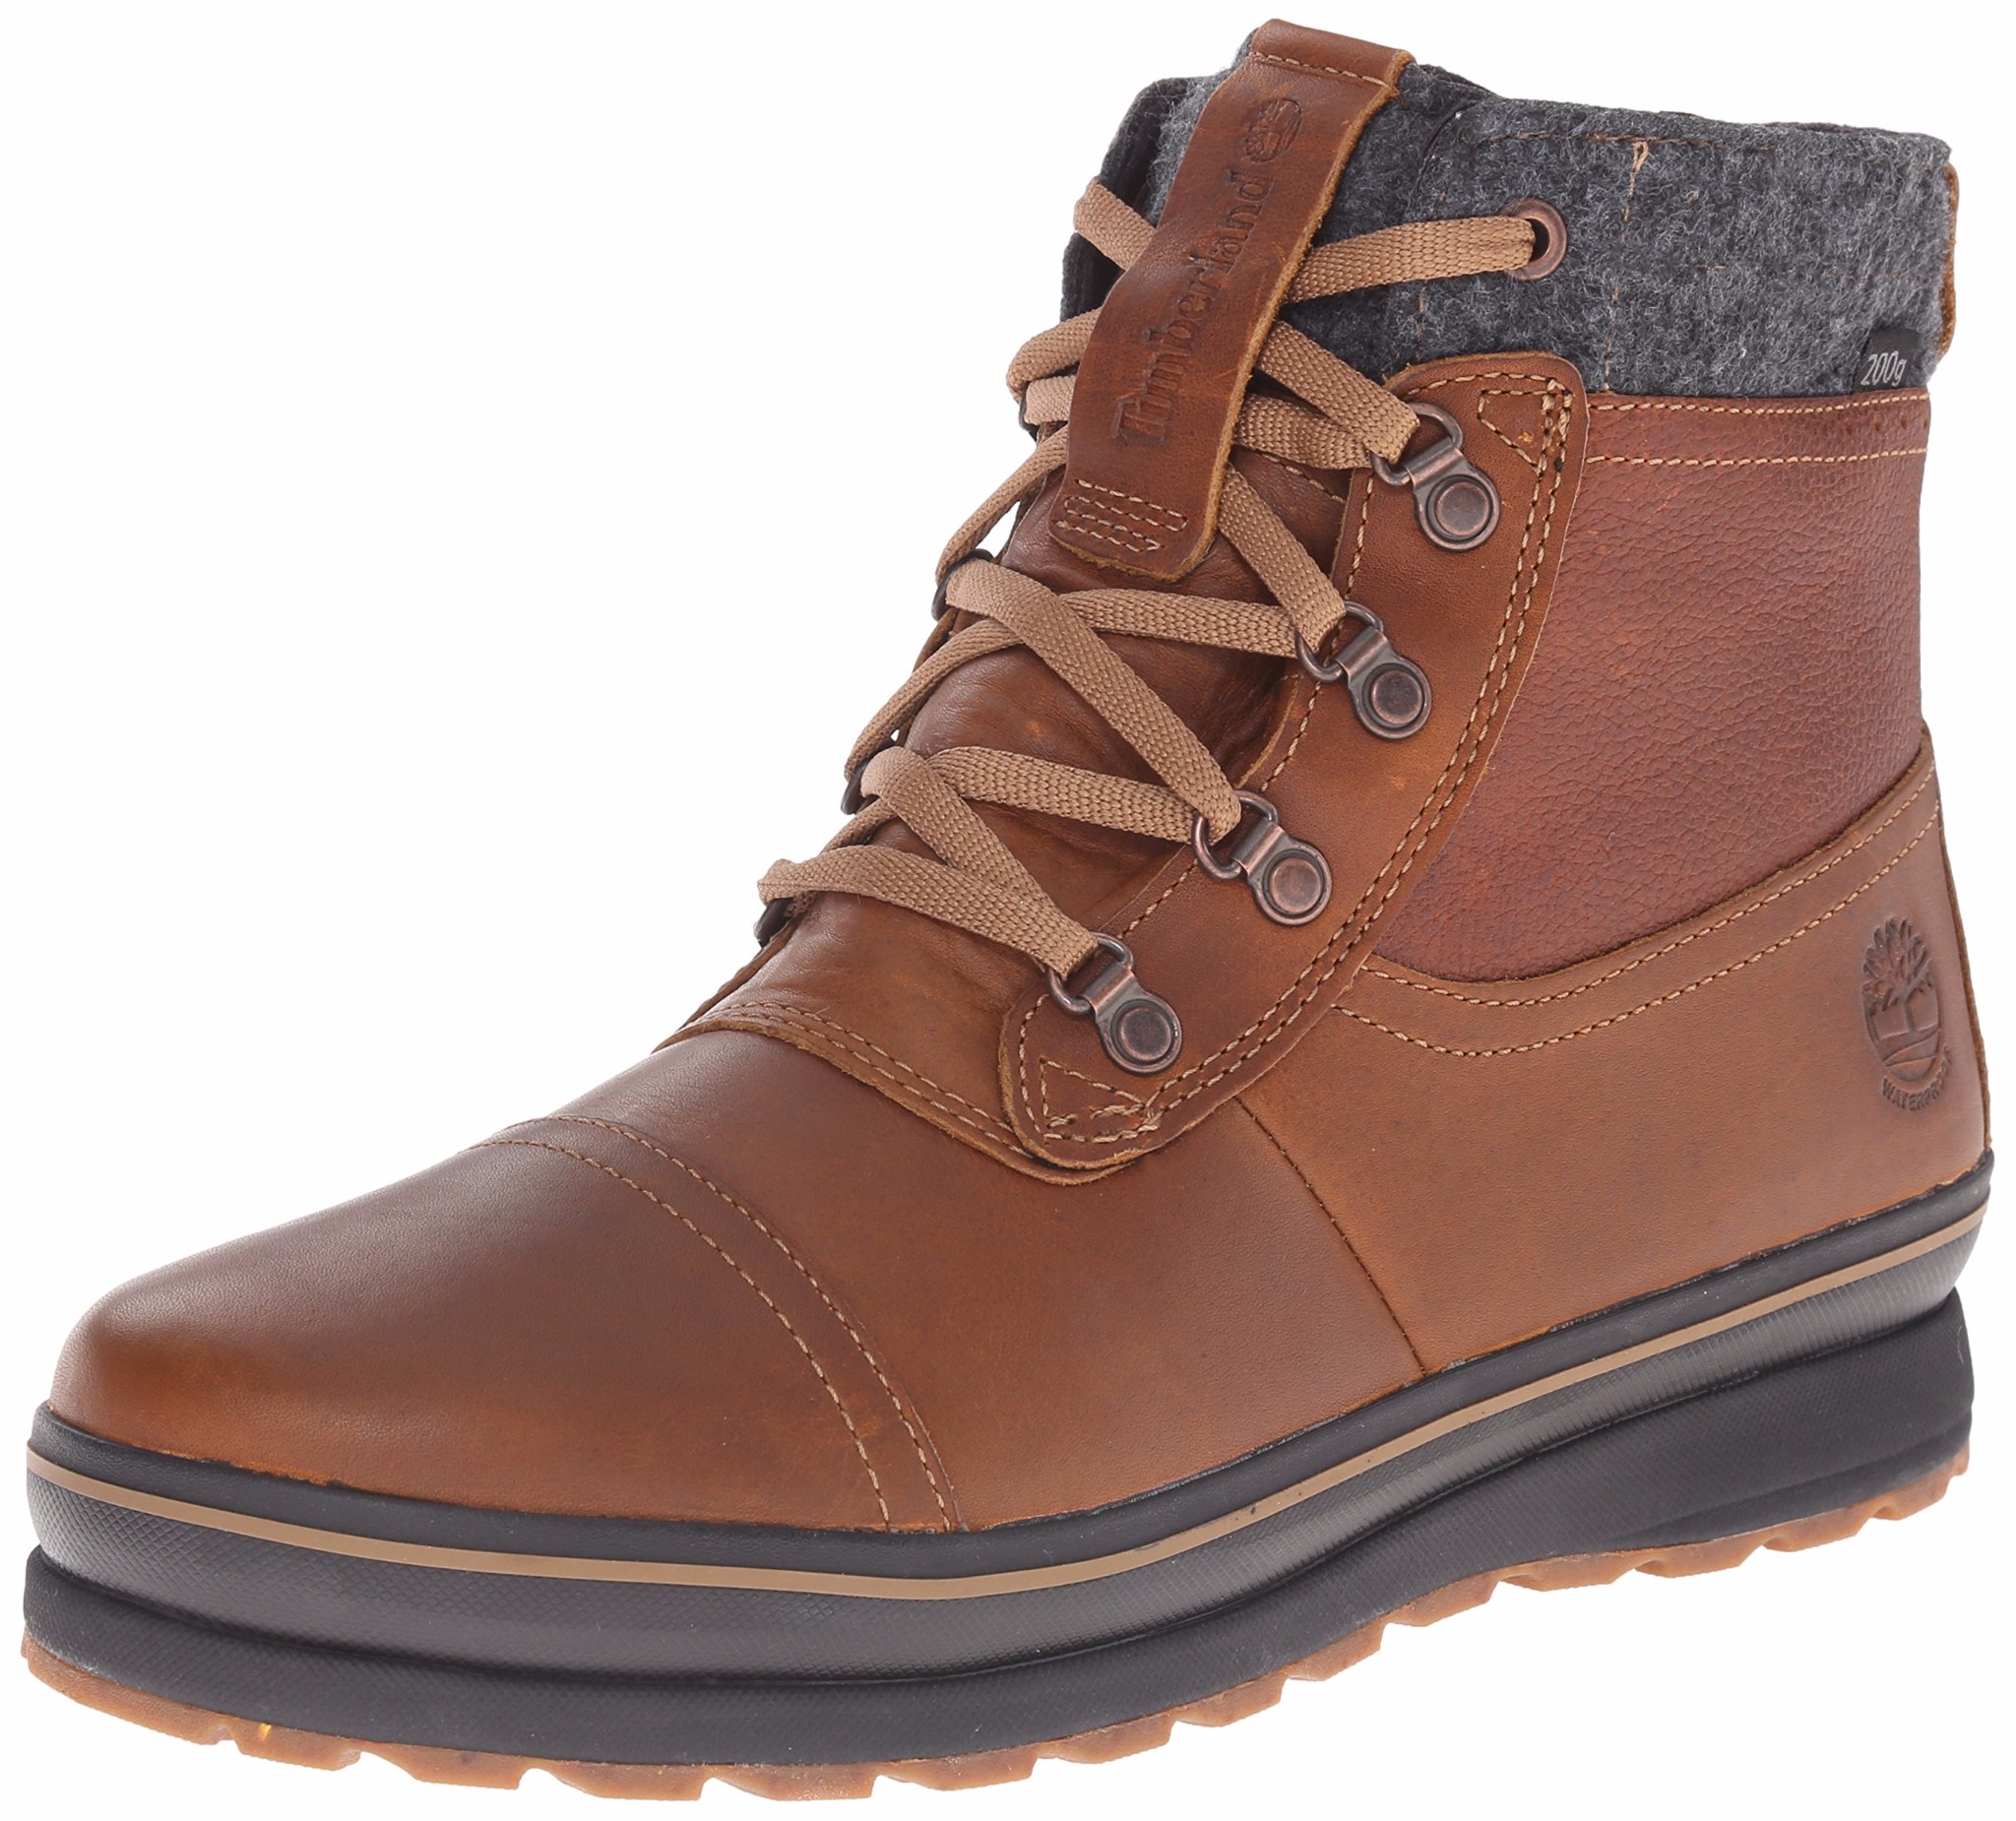 Timberland Snow Boots for Men - Online Boots